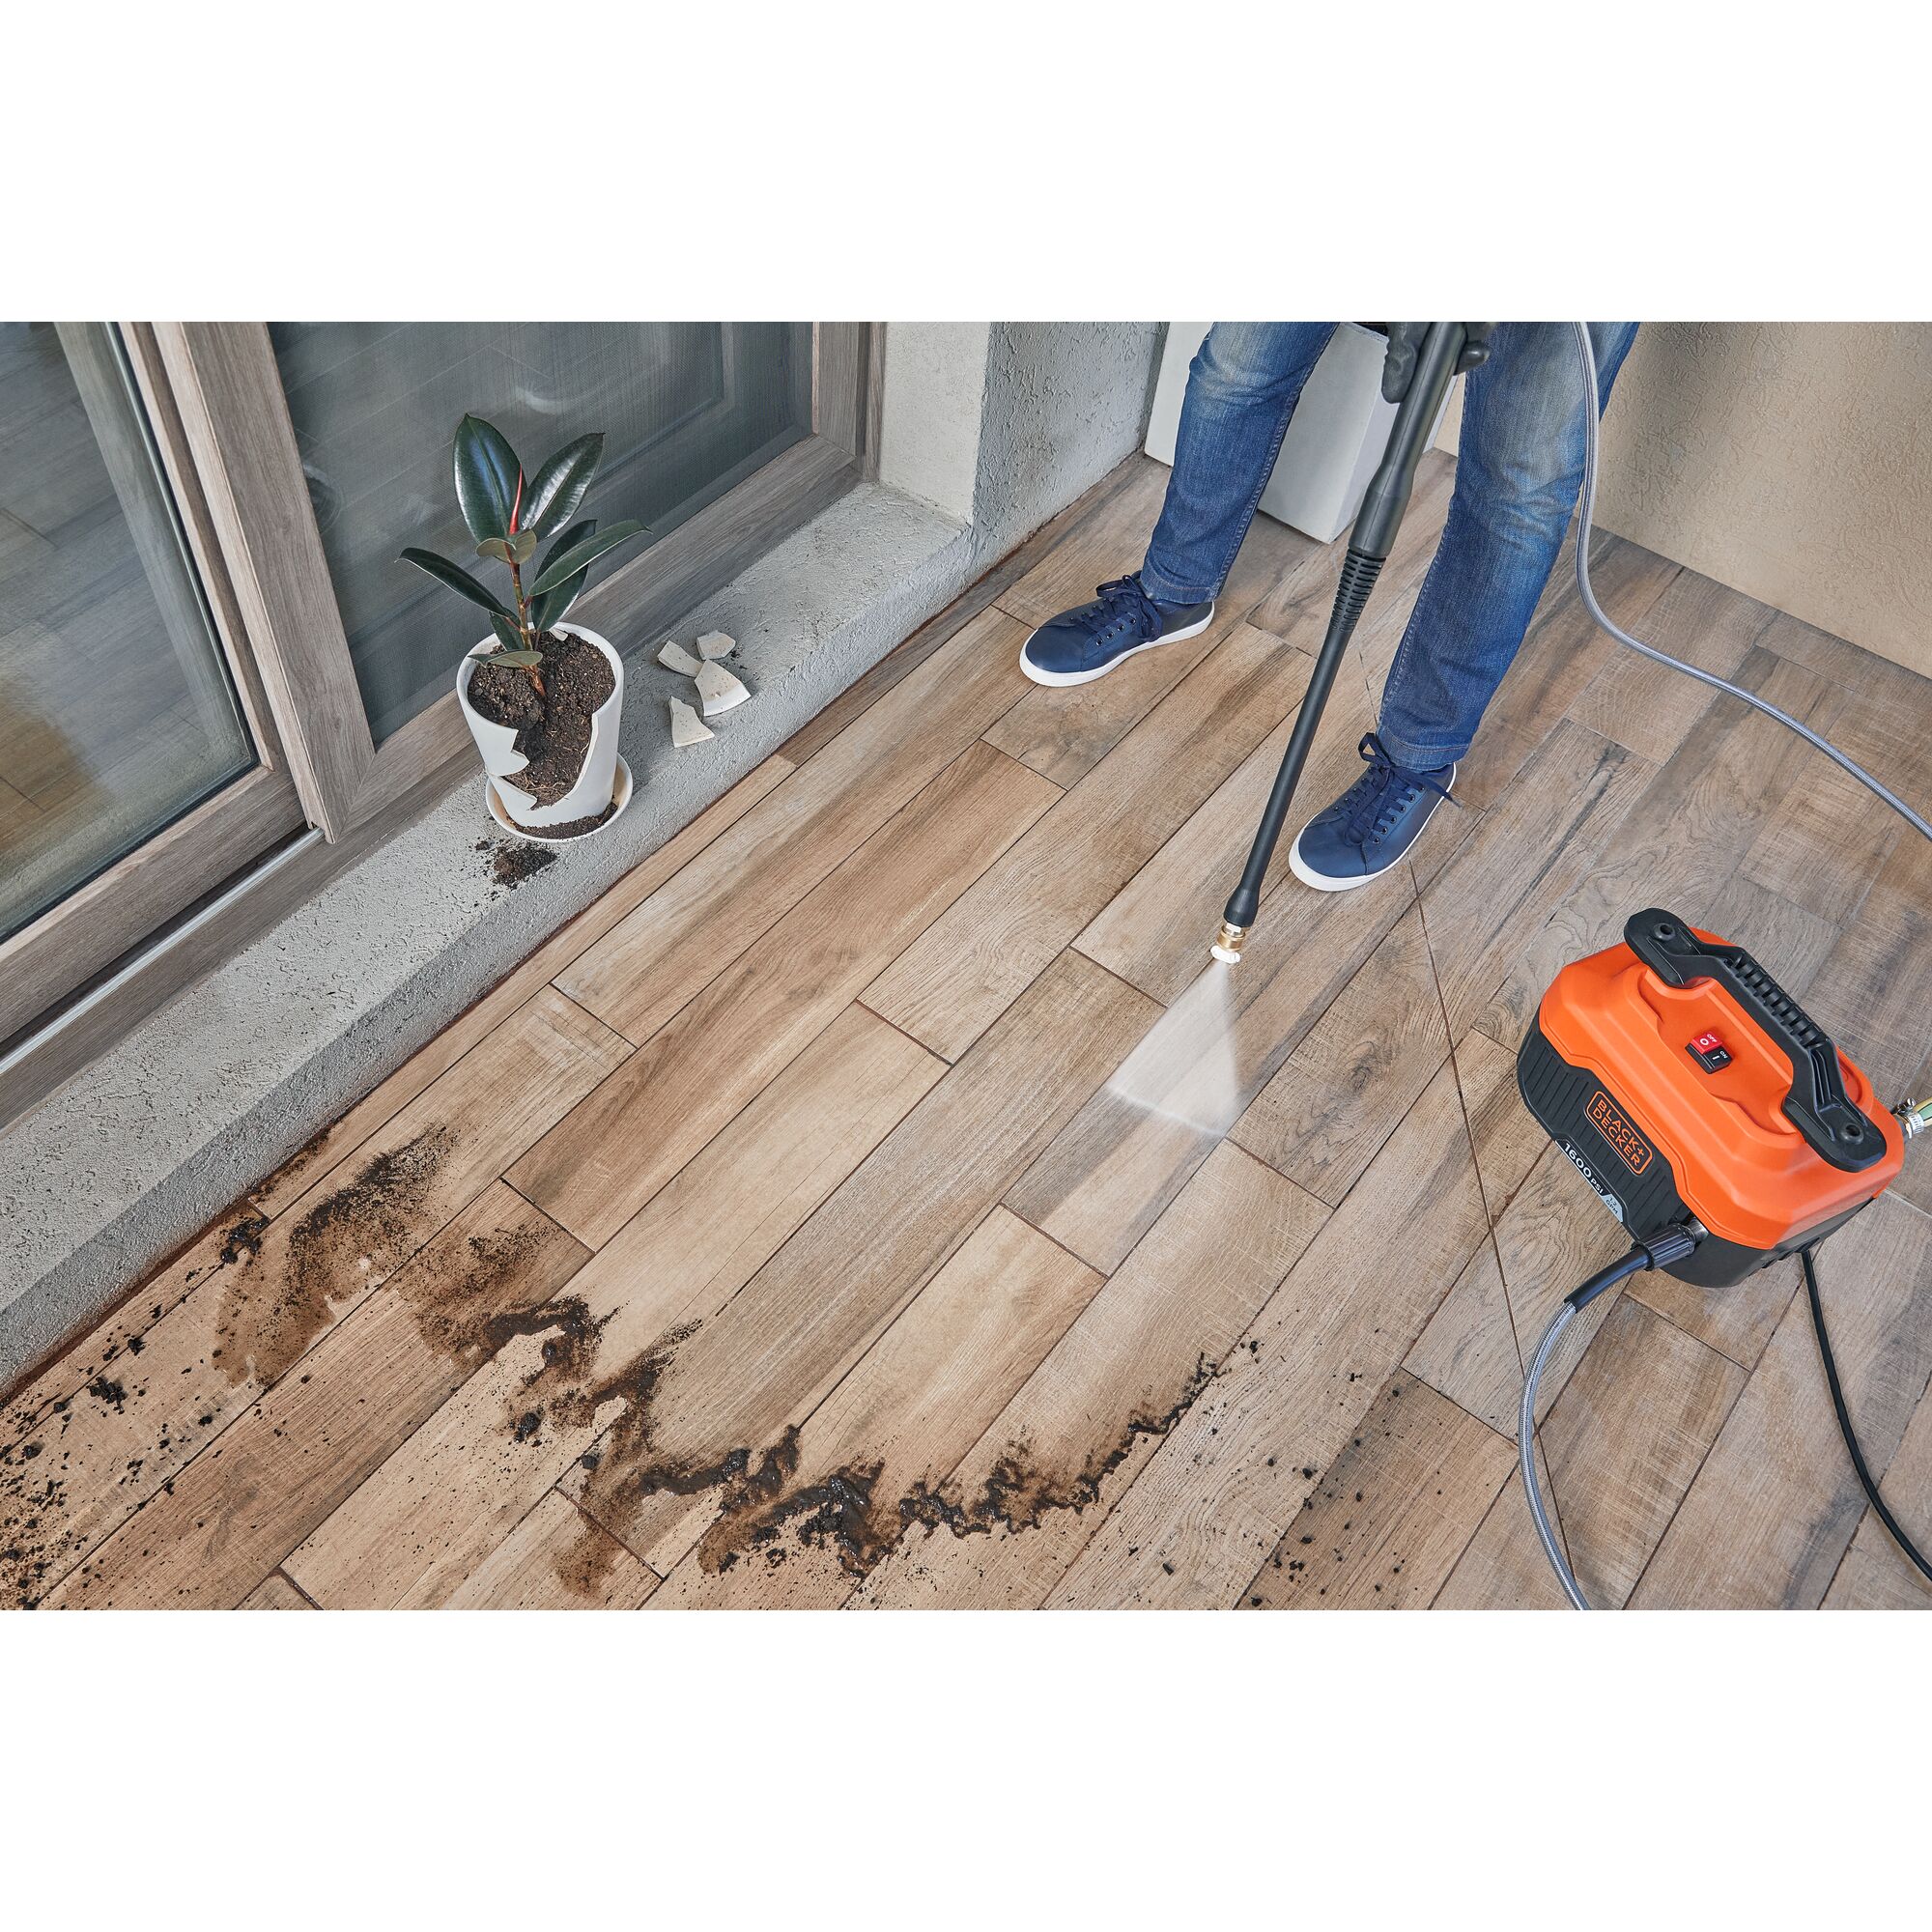 Person shown from waist down using BLACK+DECKER 1,600 MAX* psi pressure washer with the 40\u02da nozzle to clean dirt off patio